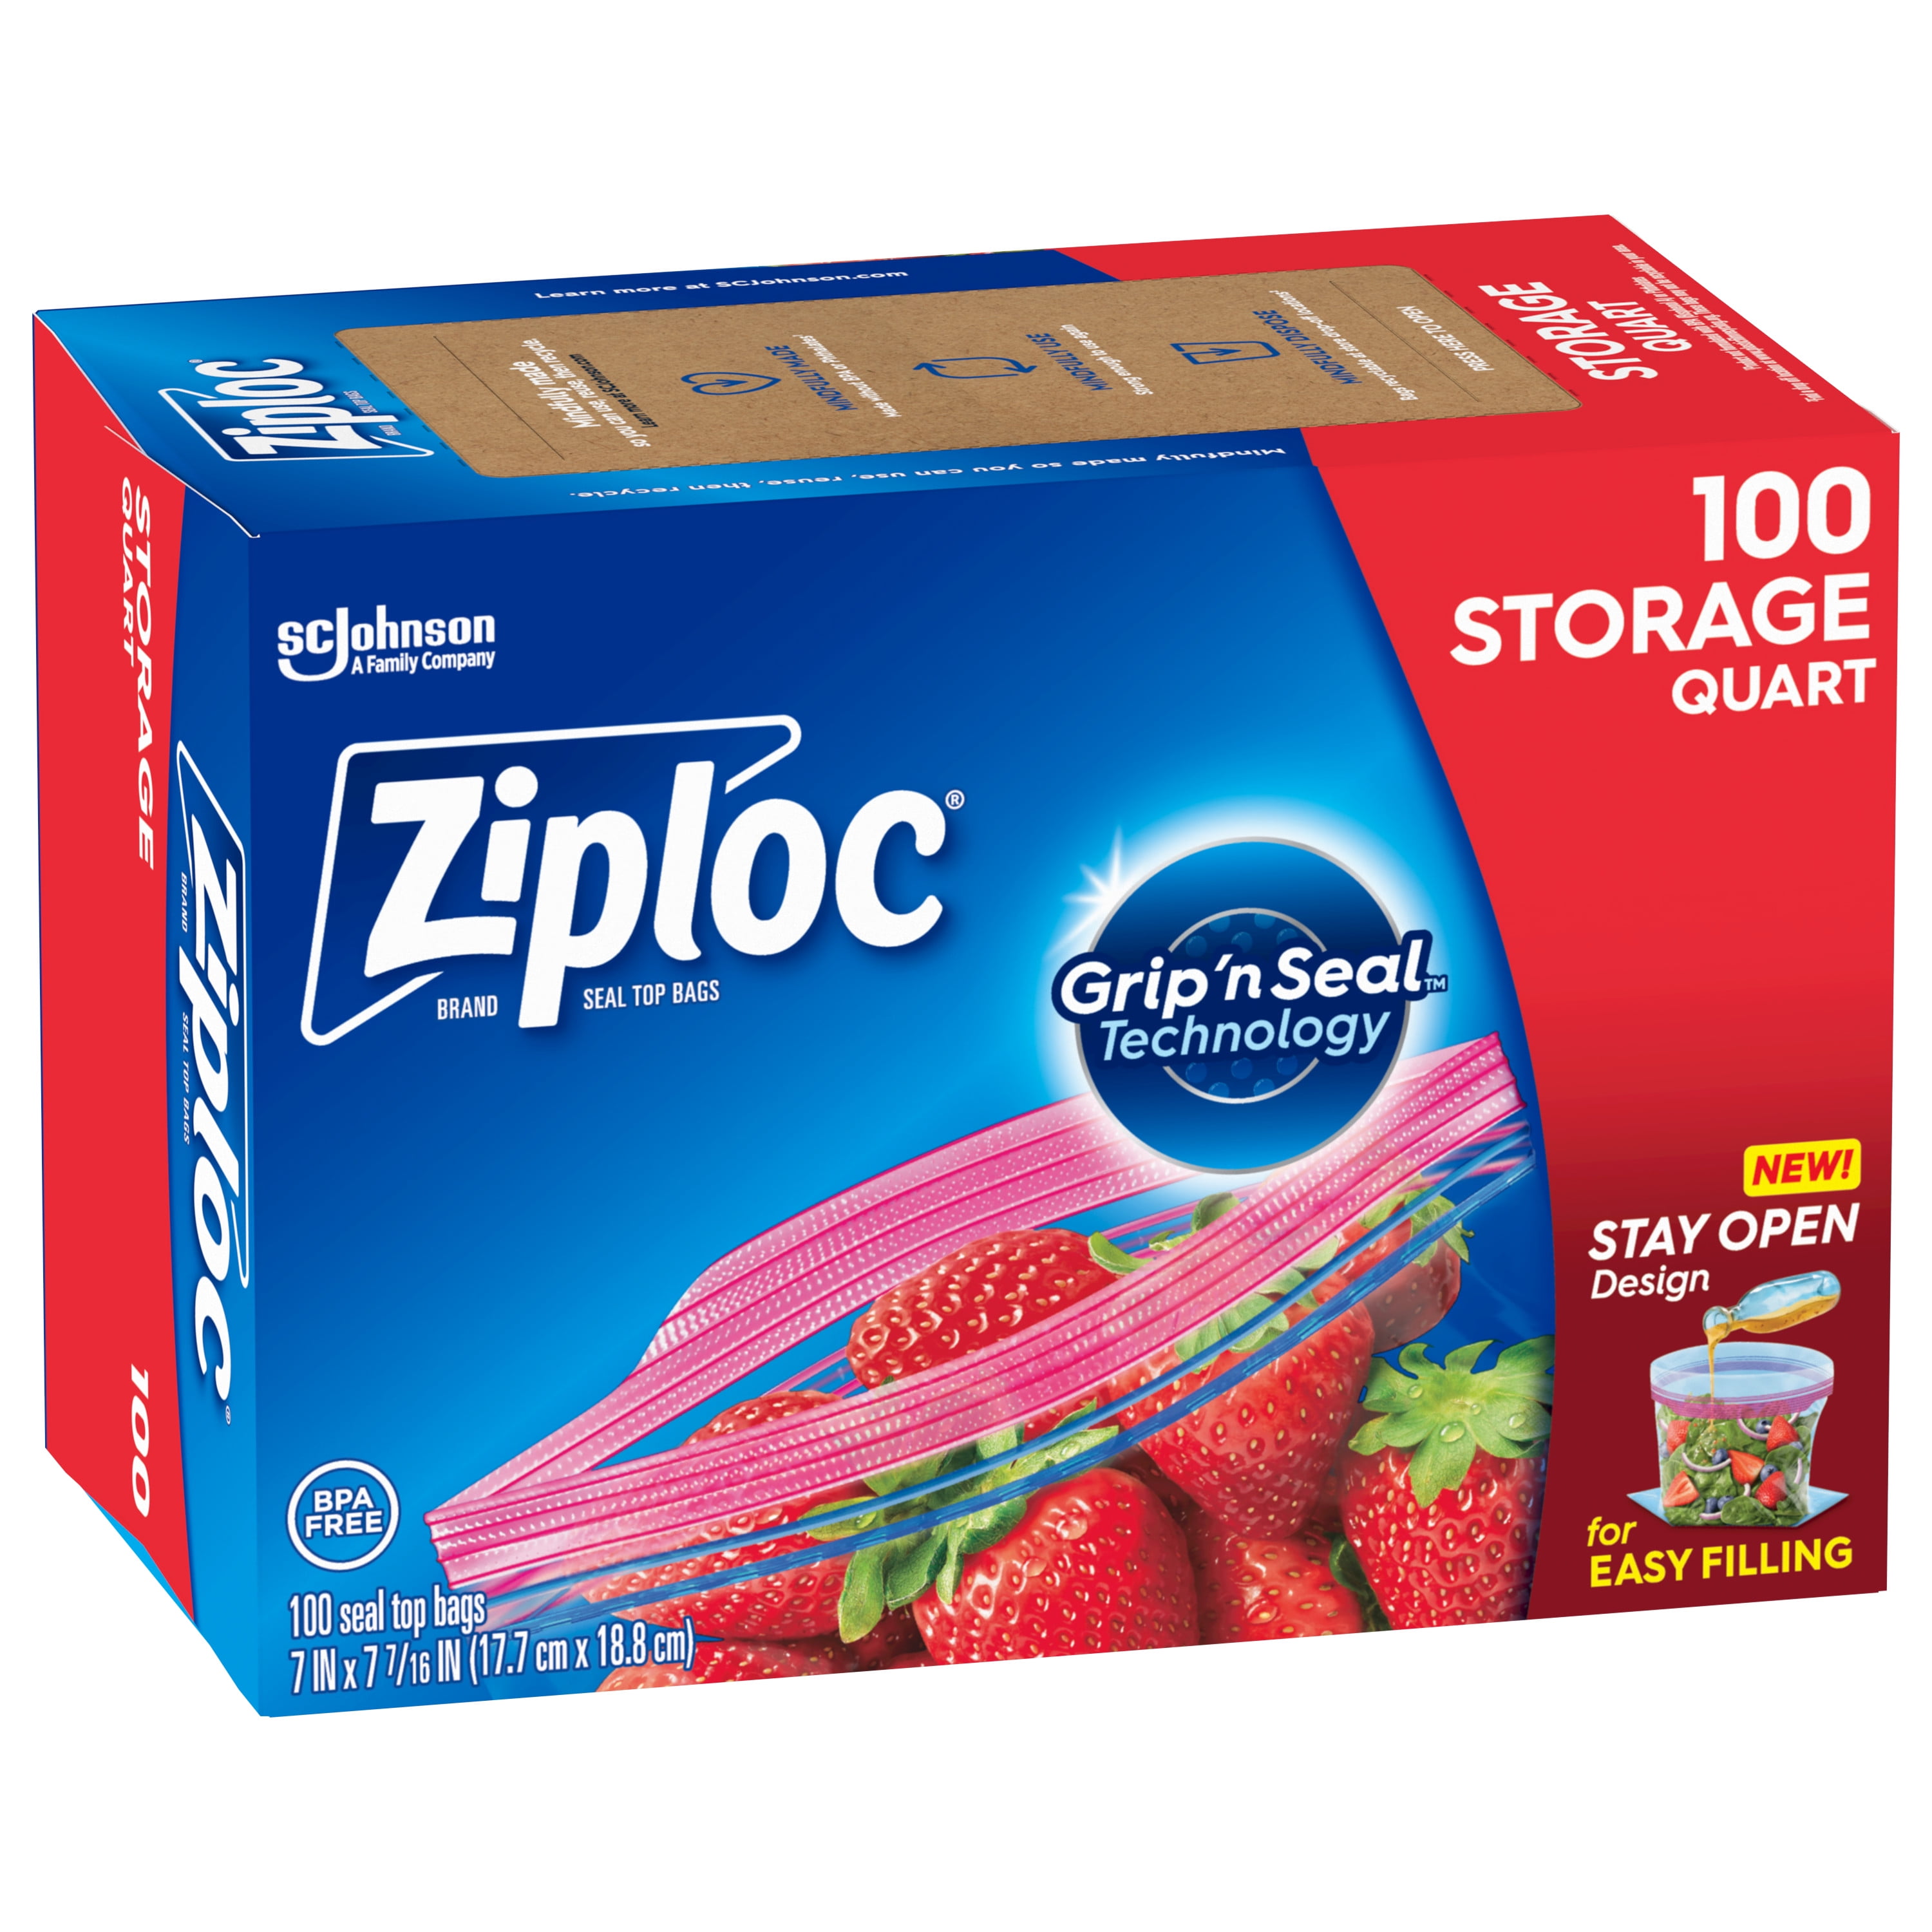 Ziploc® Gallon Storage Bags with Stay Open Design, 19 ct - Fry's